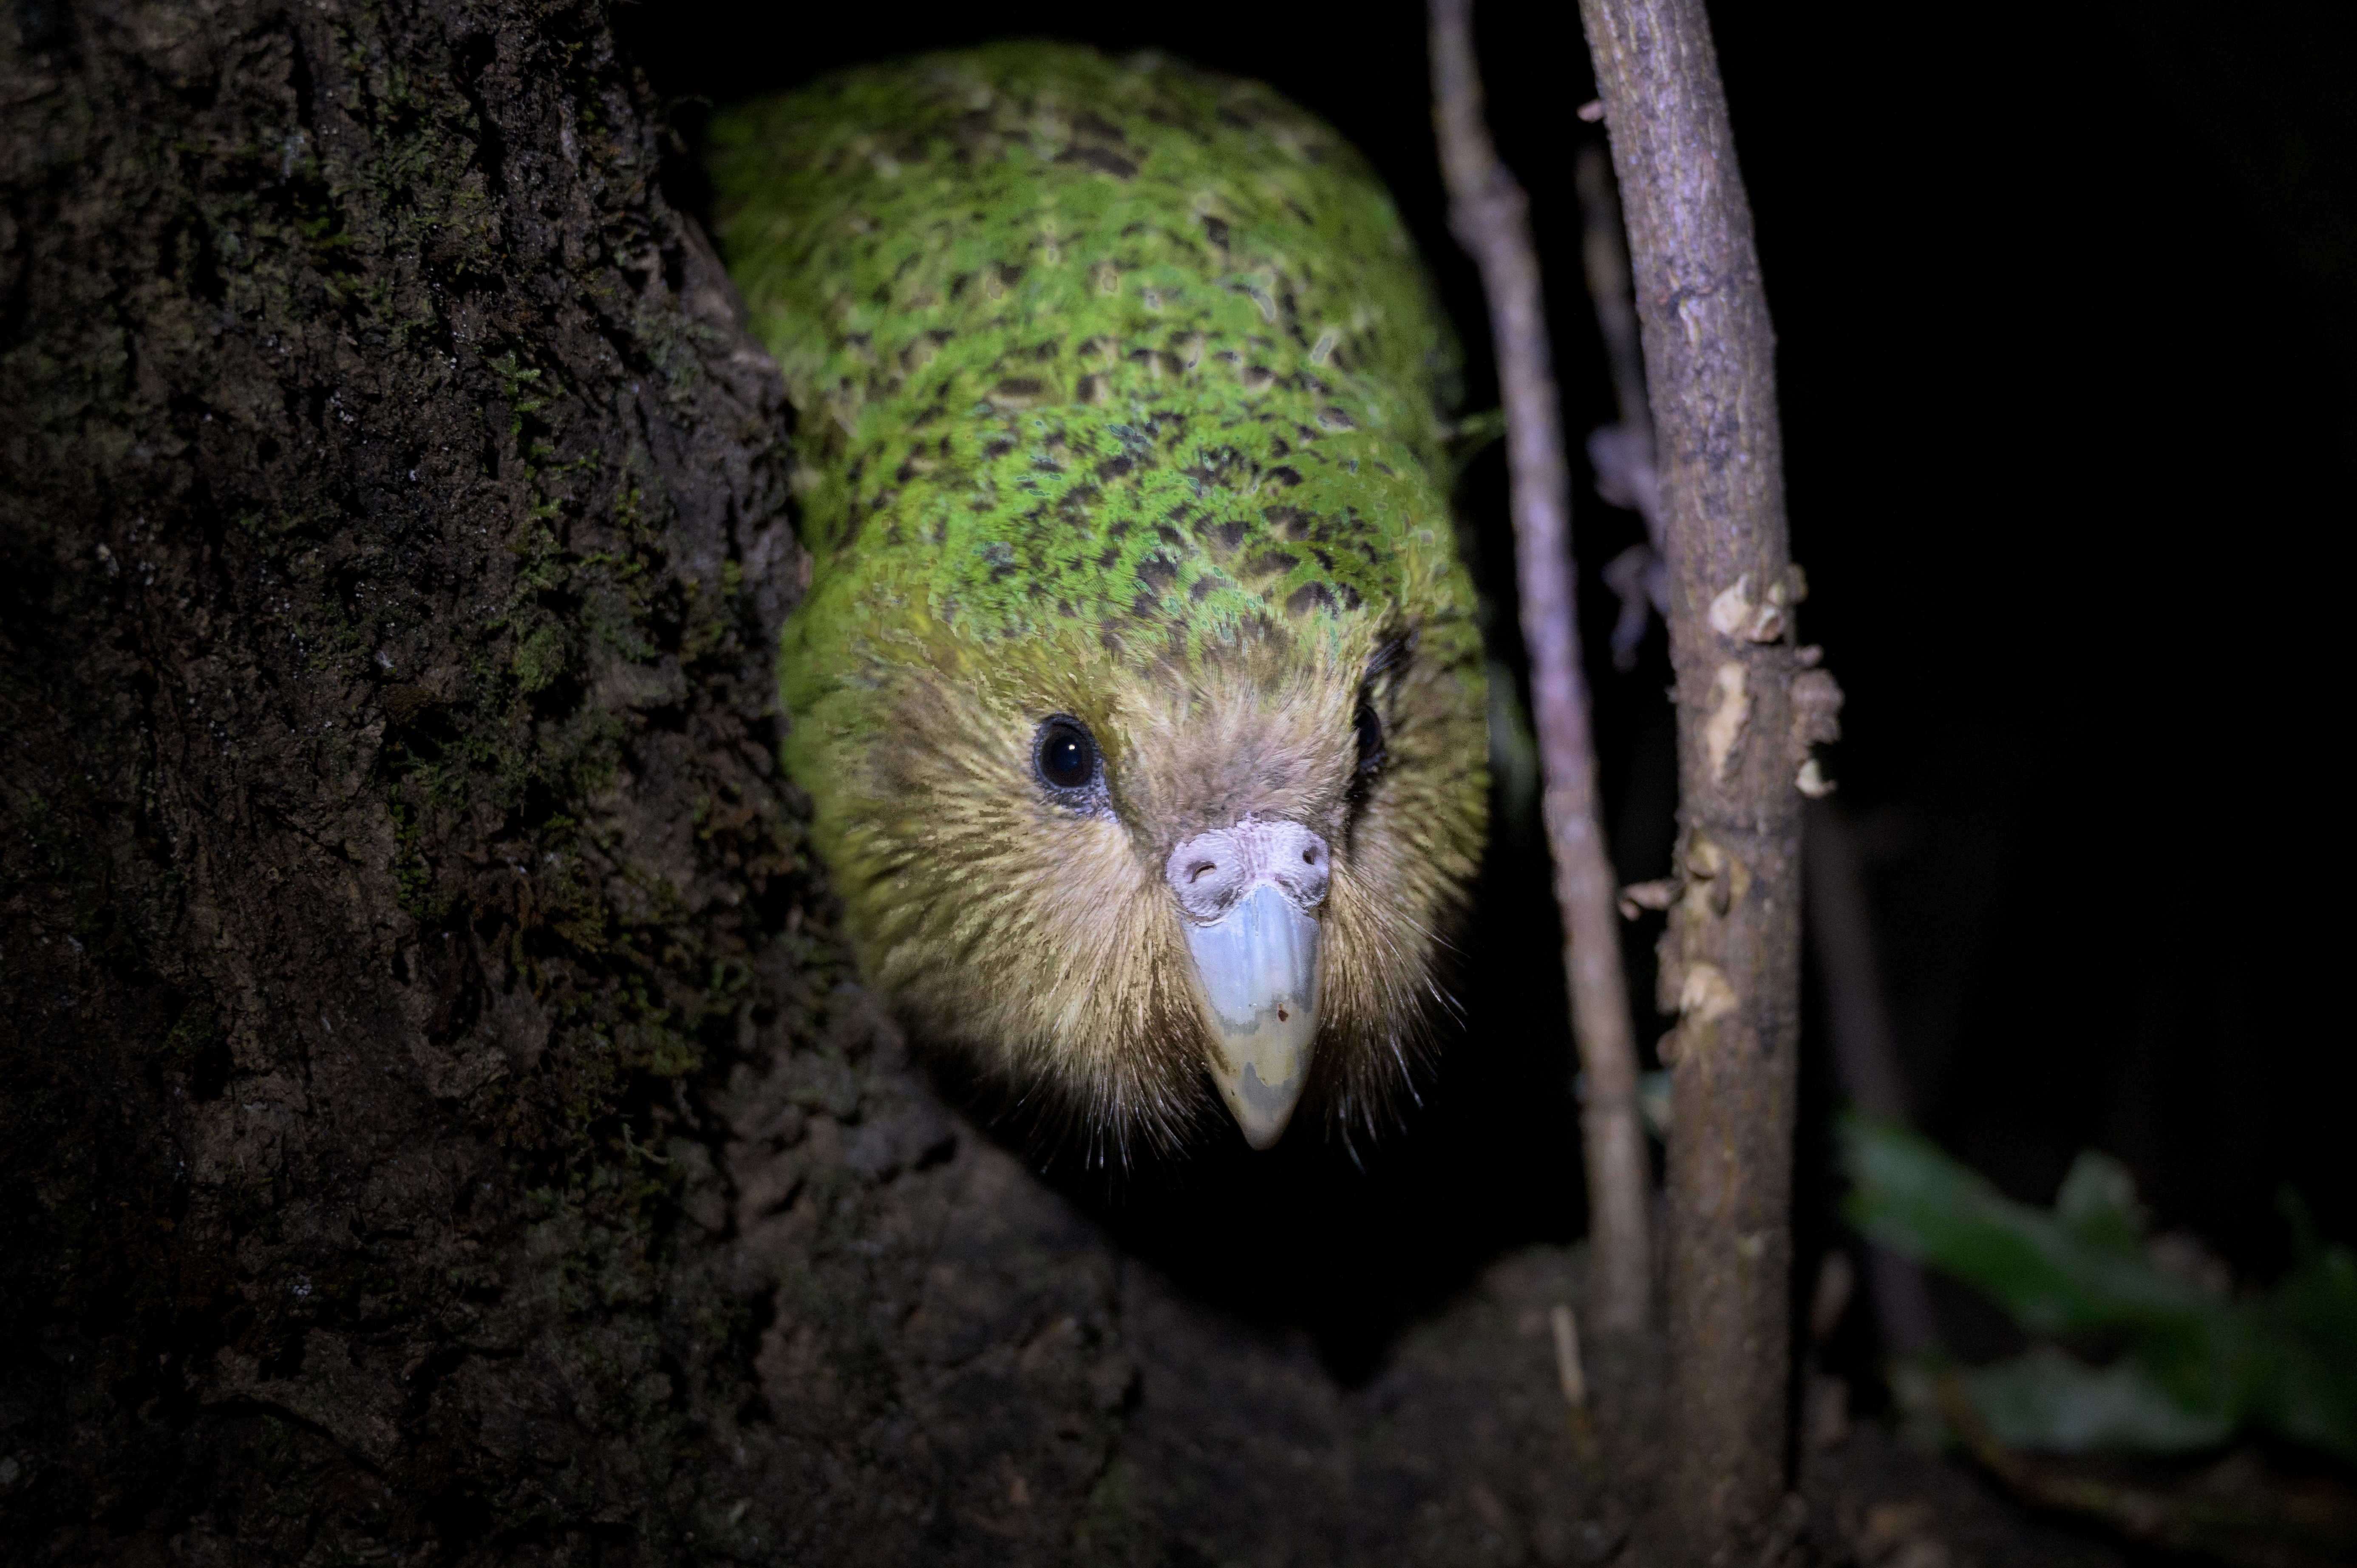 Close-up picture of a Kākāpō with green plumage in native bush walking into the light towards the camera out of darkness.